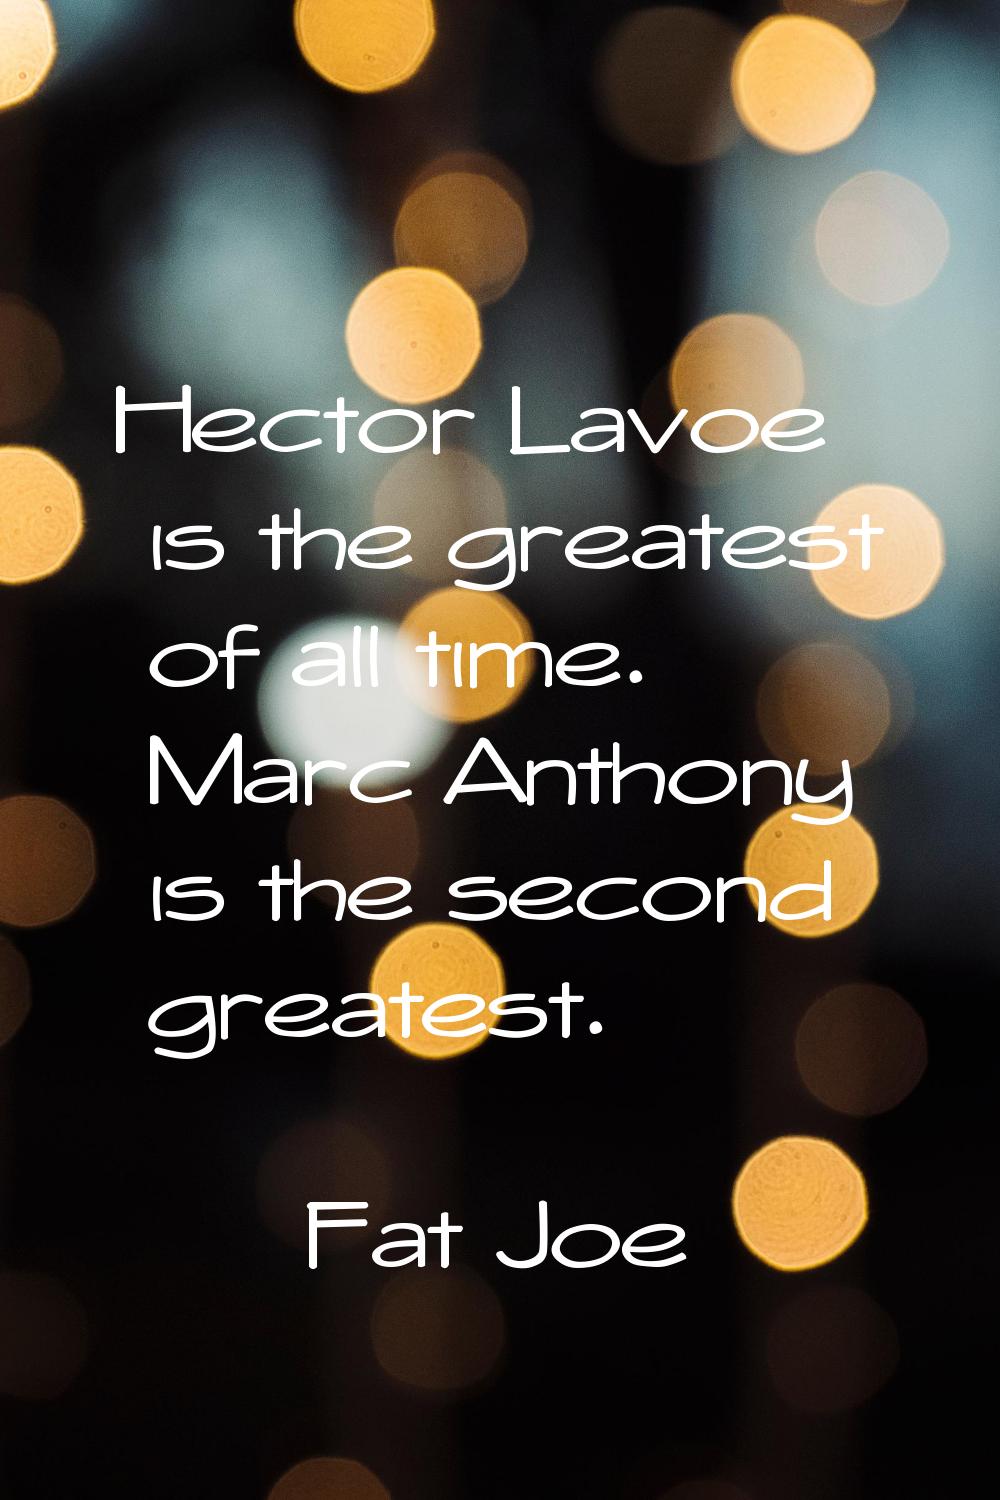 Hector Lavoe is the greatest of all time. Marc Anthony is the second greatest.